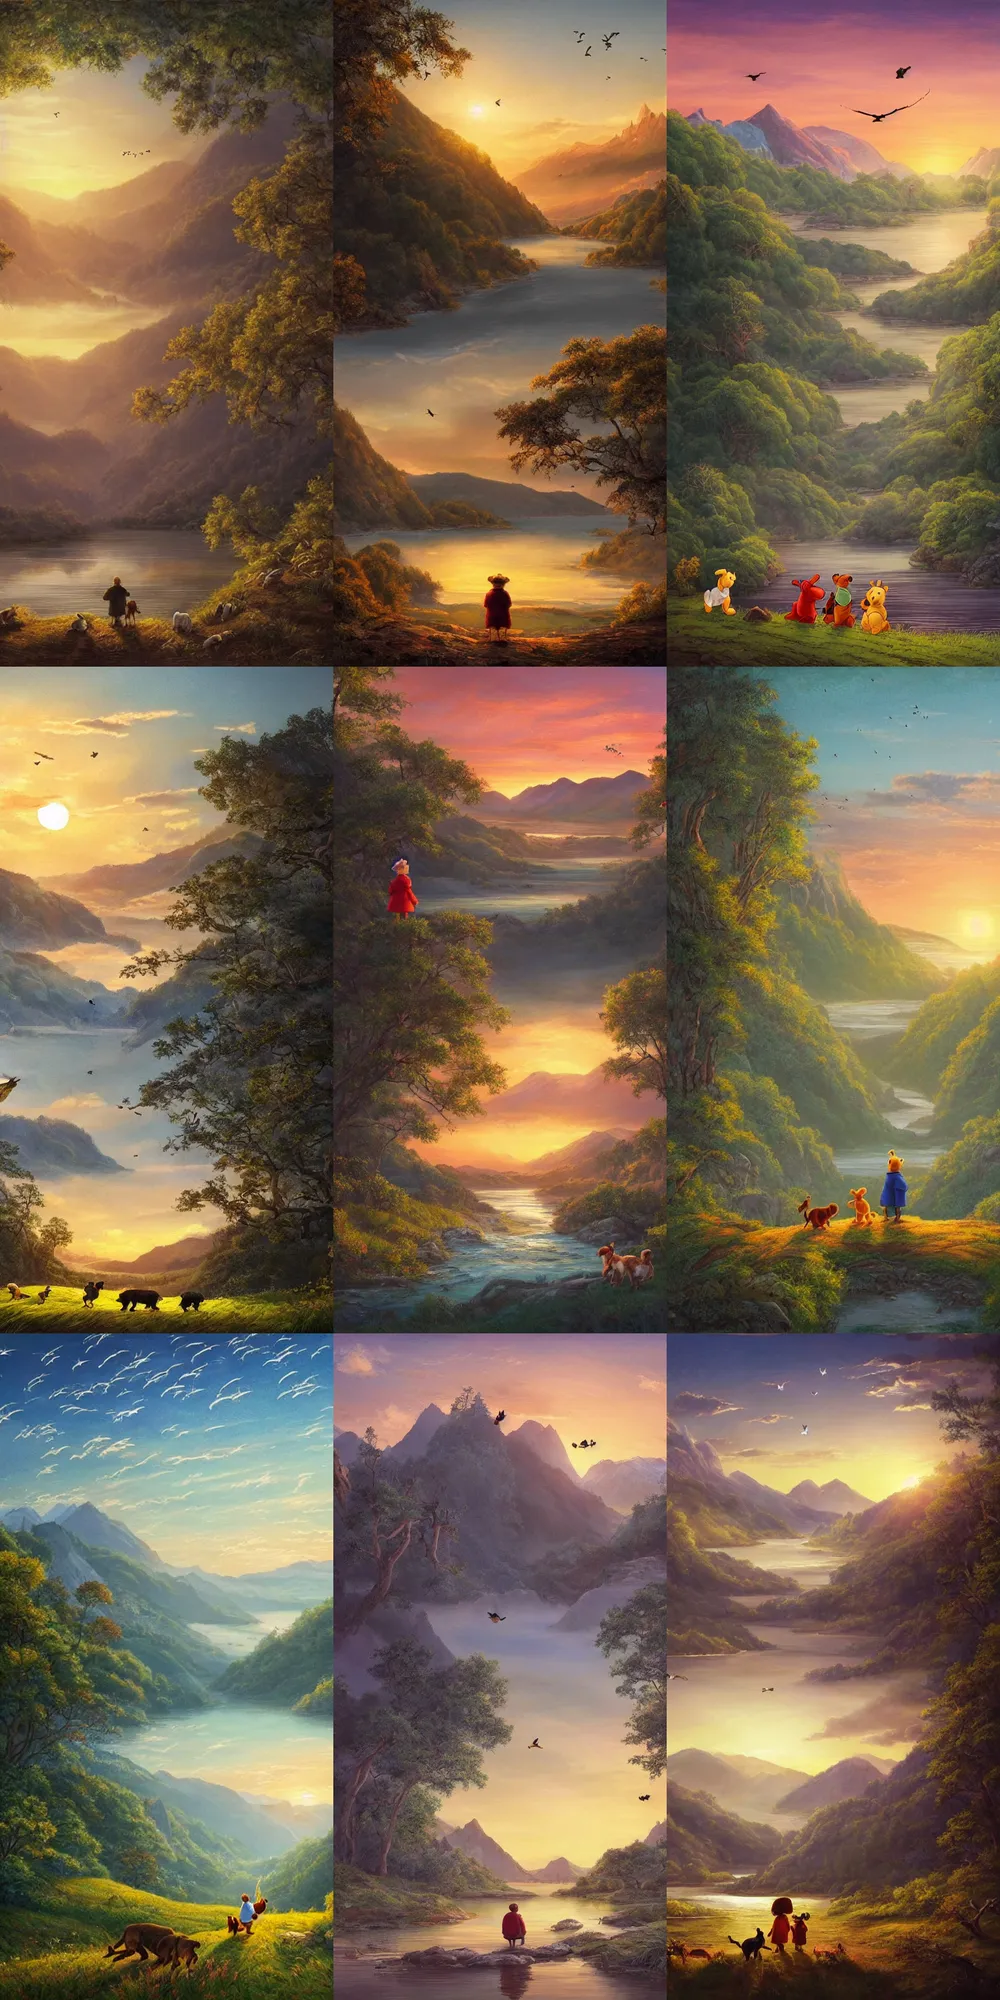 Prompt: A majestic landscape featuring a river, mountains and a forest. A group of birds is flying in the sky. There is an old man with a dog standing next to him. They are both staring at the sunset. Cinematic, very beautiful, painting in the style of Winnie the pooh